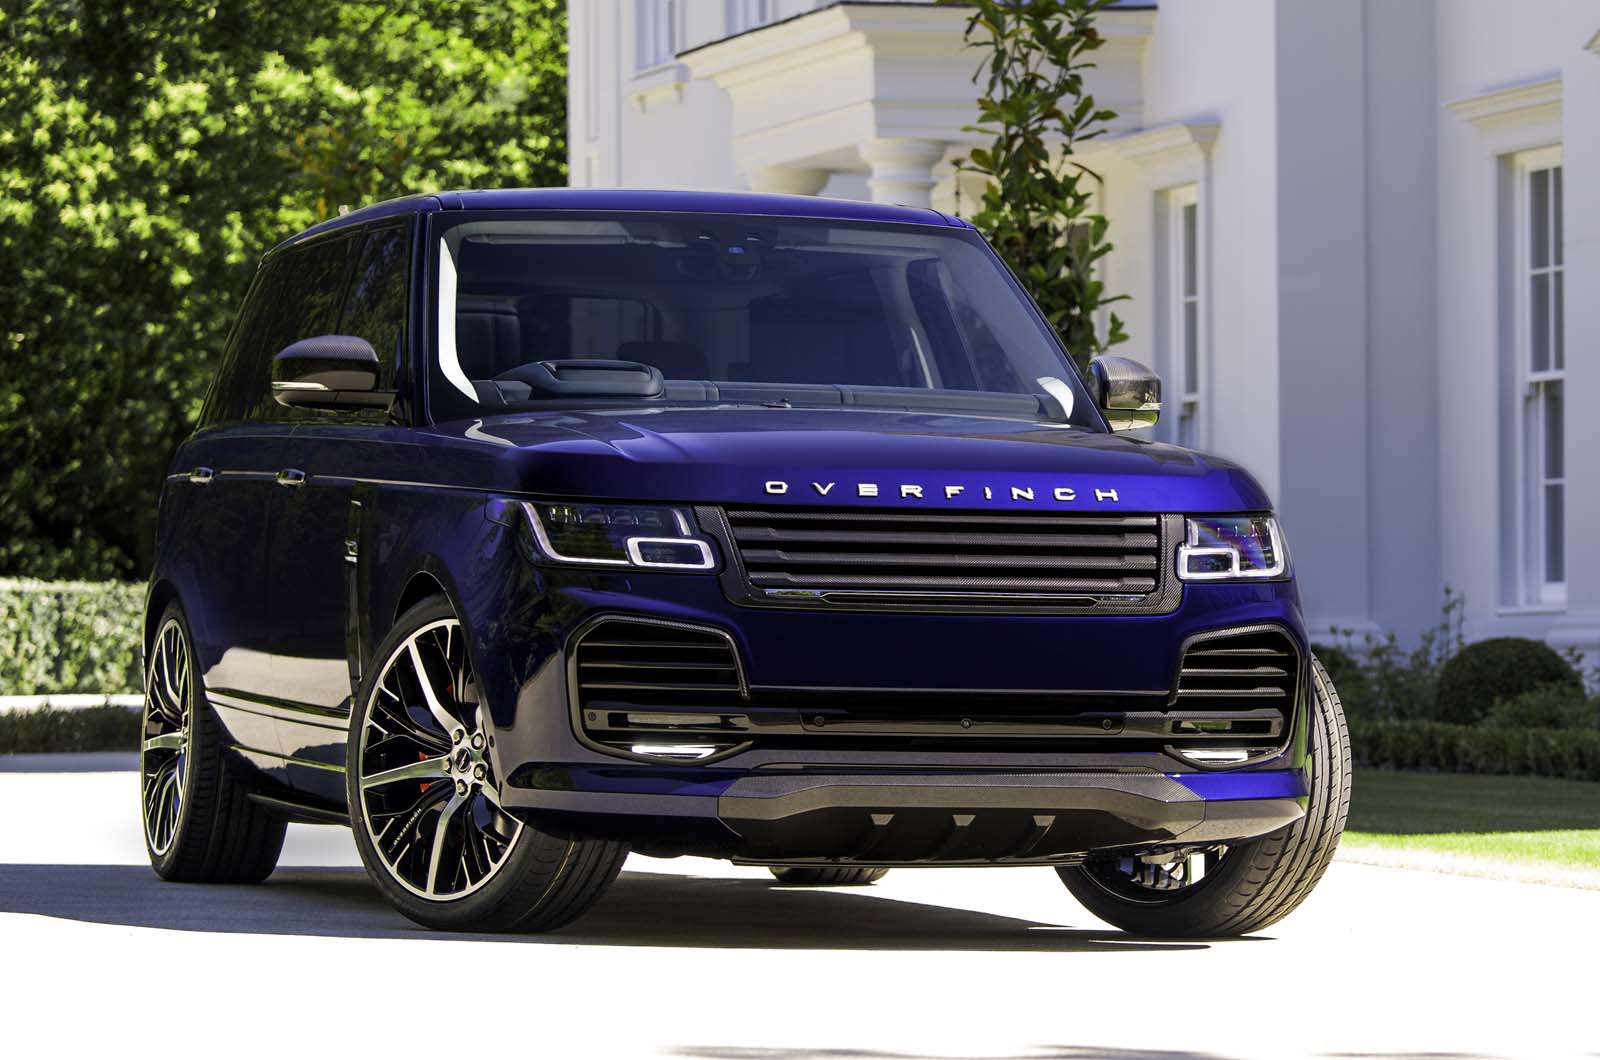 New Overfinch Range Rover adds carbonfibre and ostrich